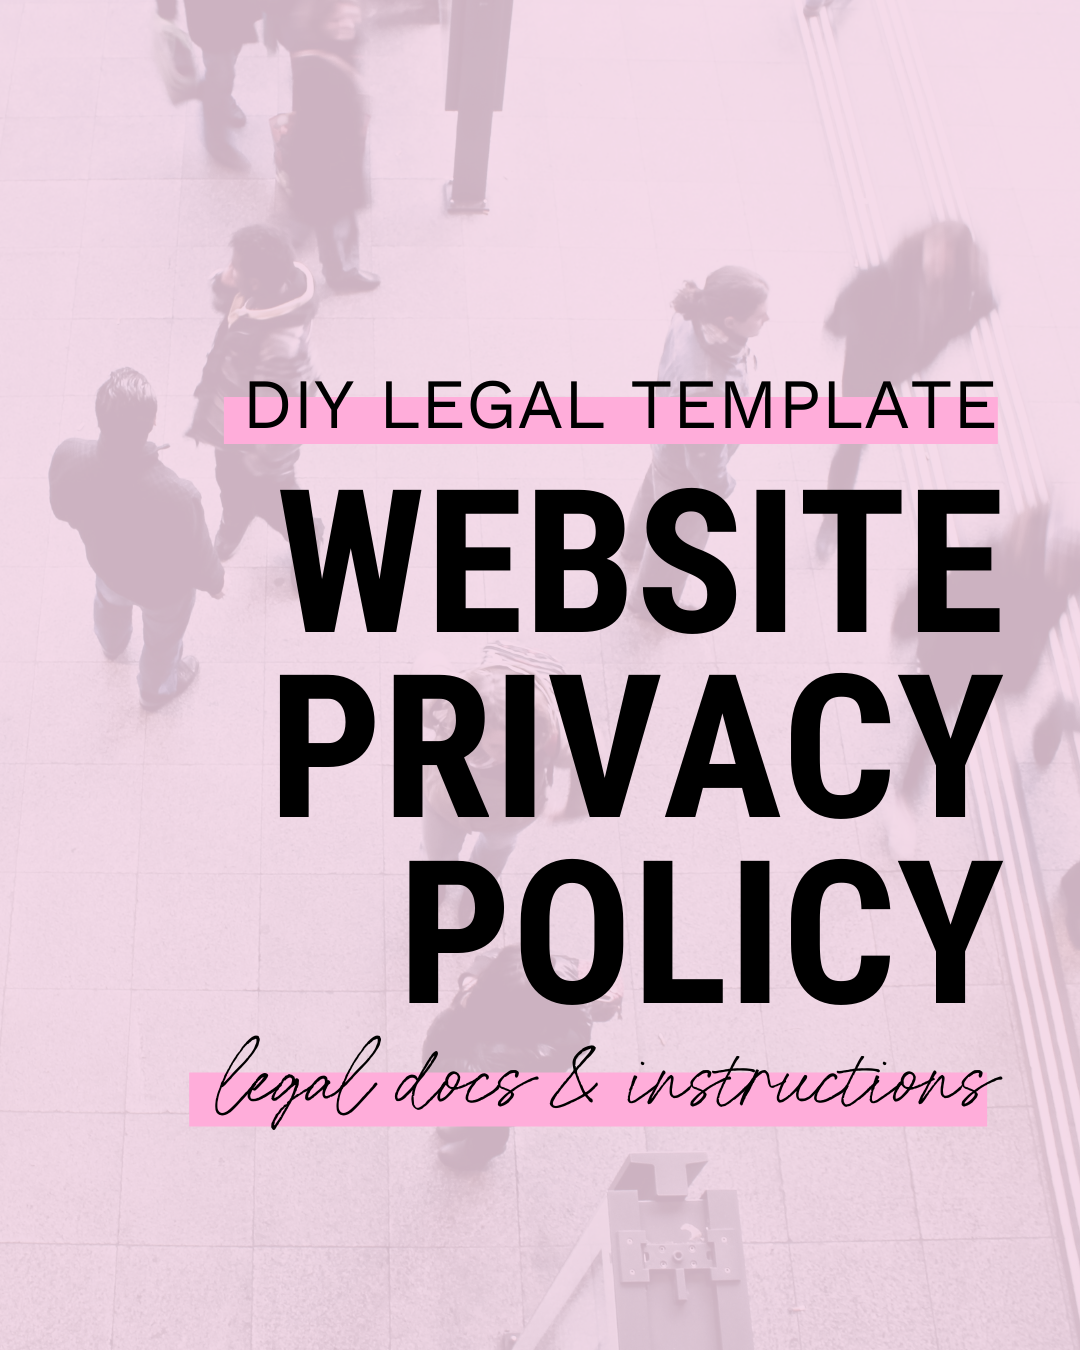 Website Privacy Policy Template - GDPR, CCPA Compliant